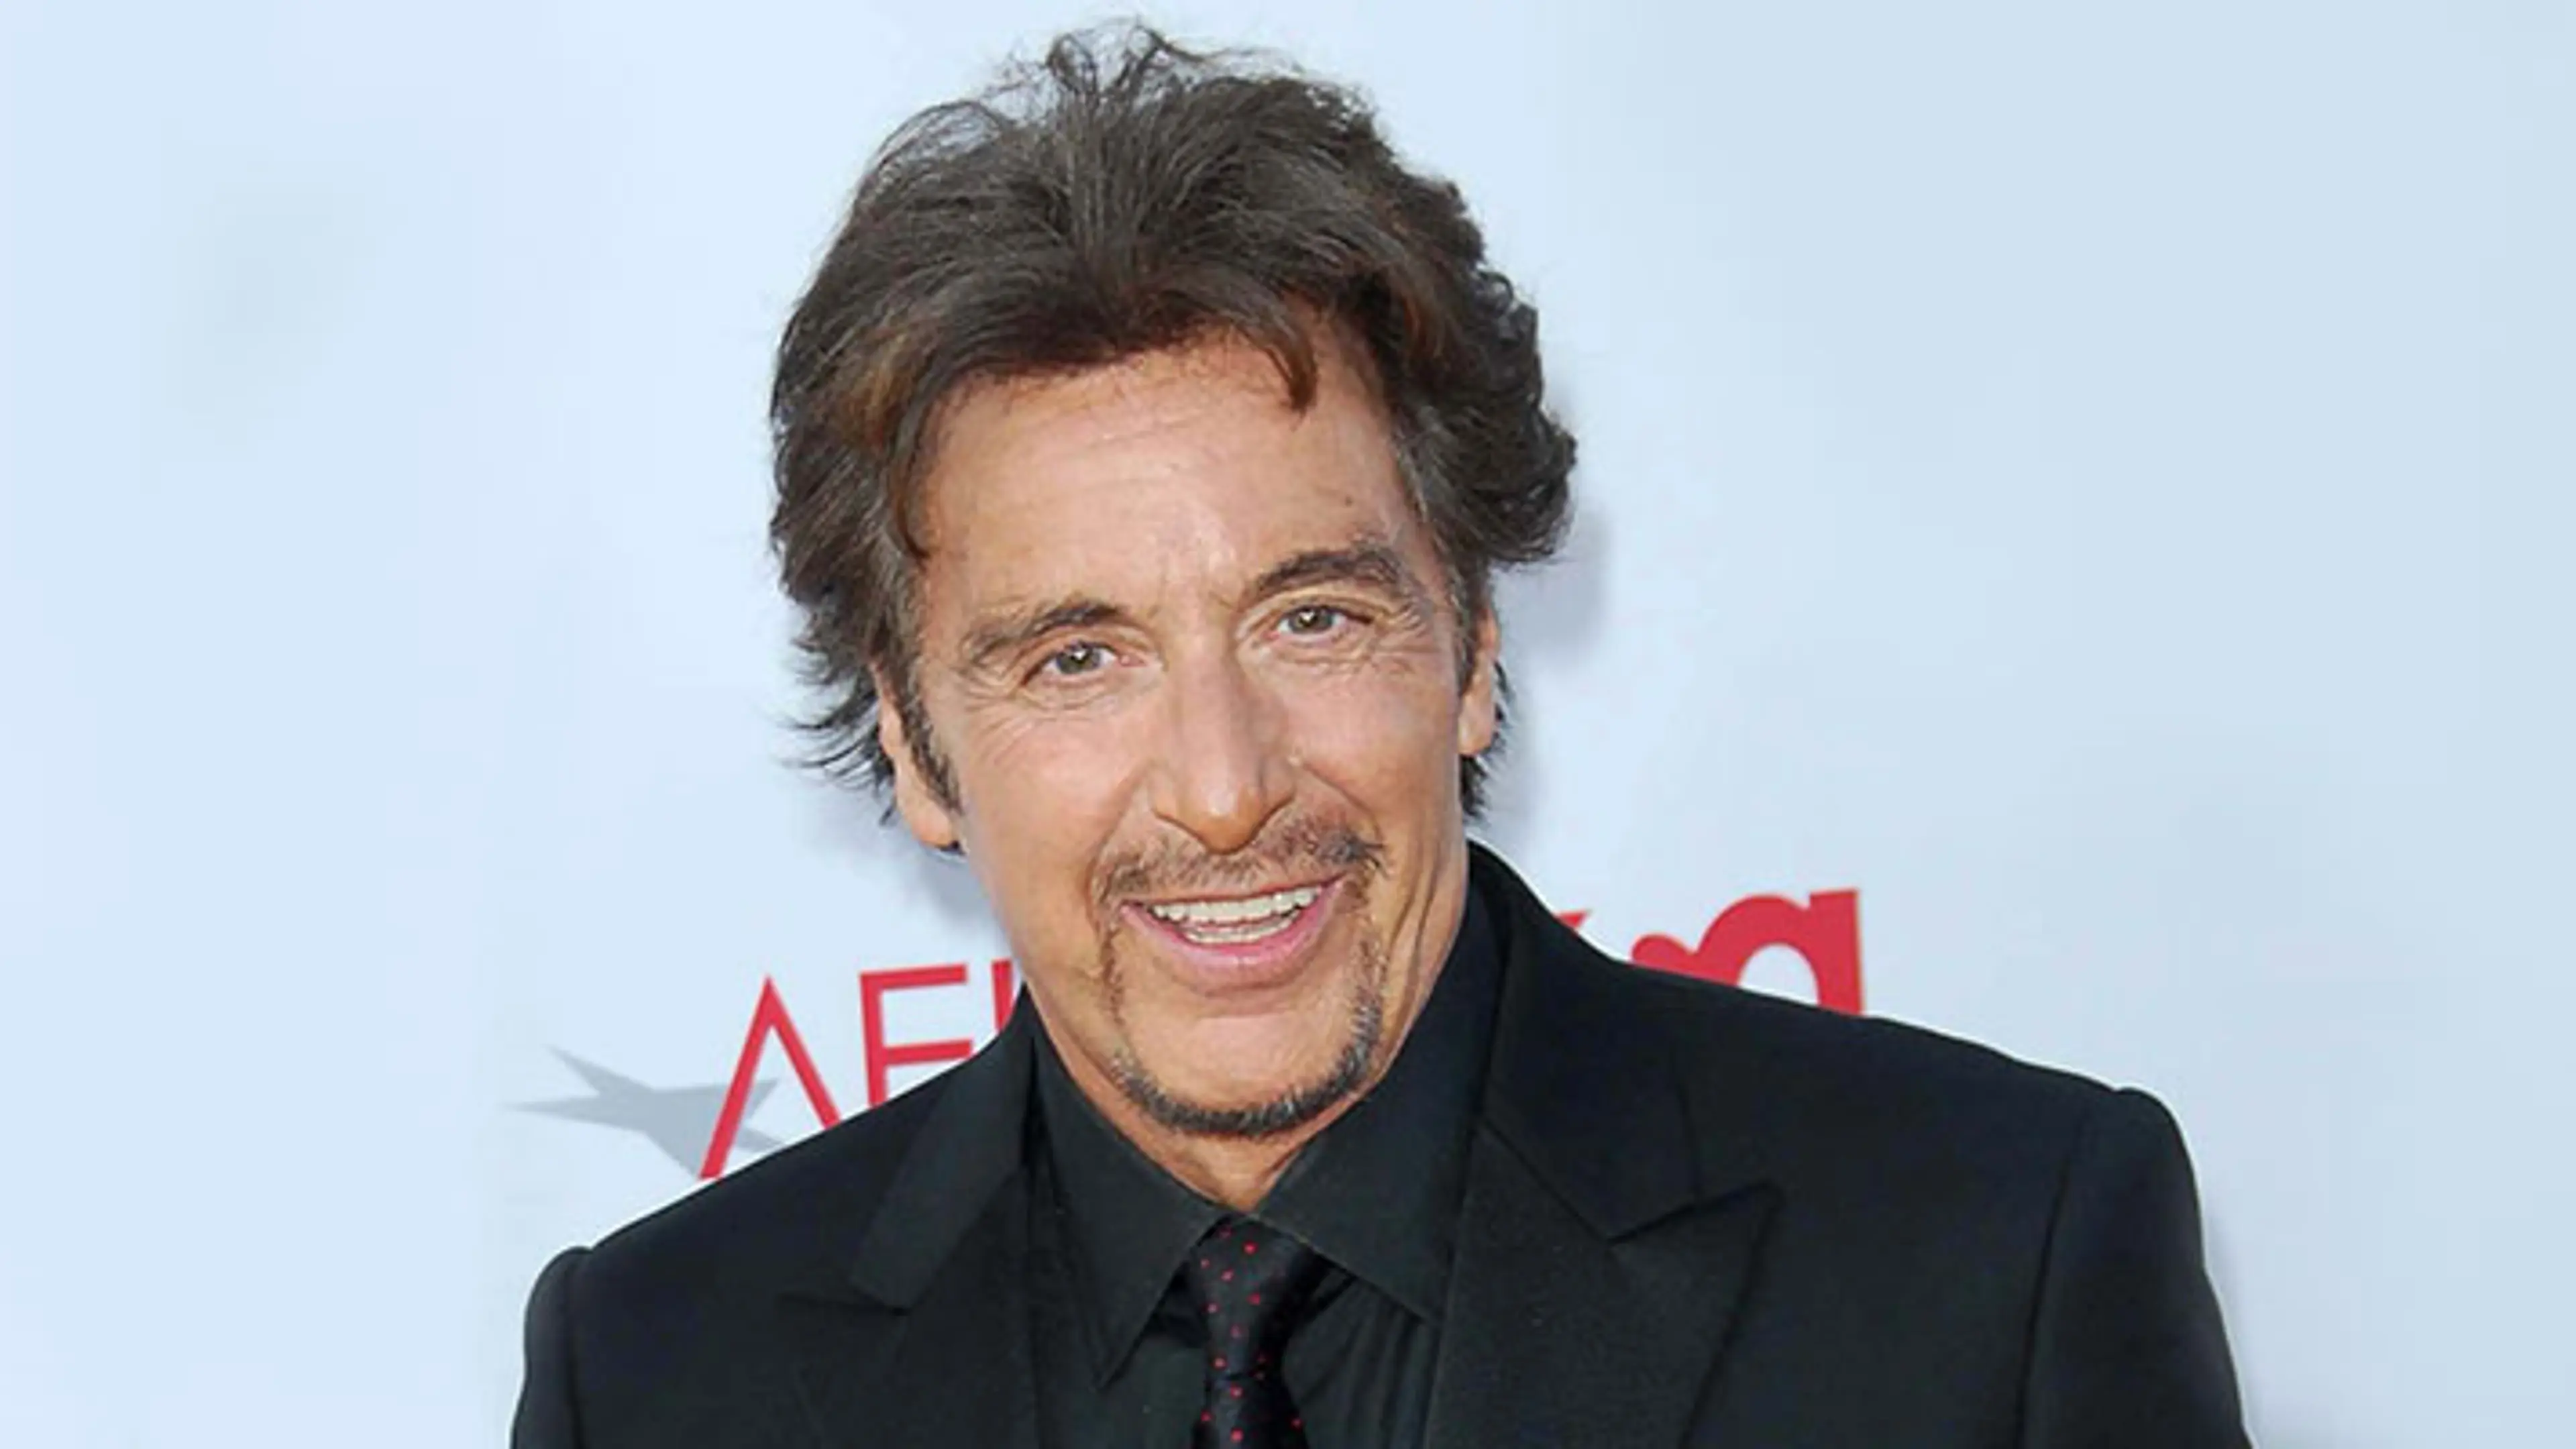 28 quotes from the timeless actor, Al Pacino